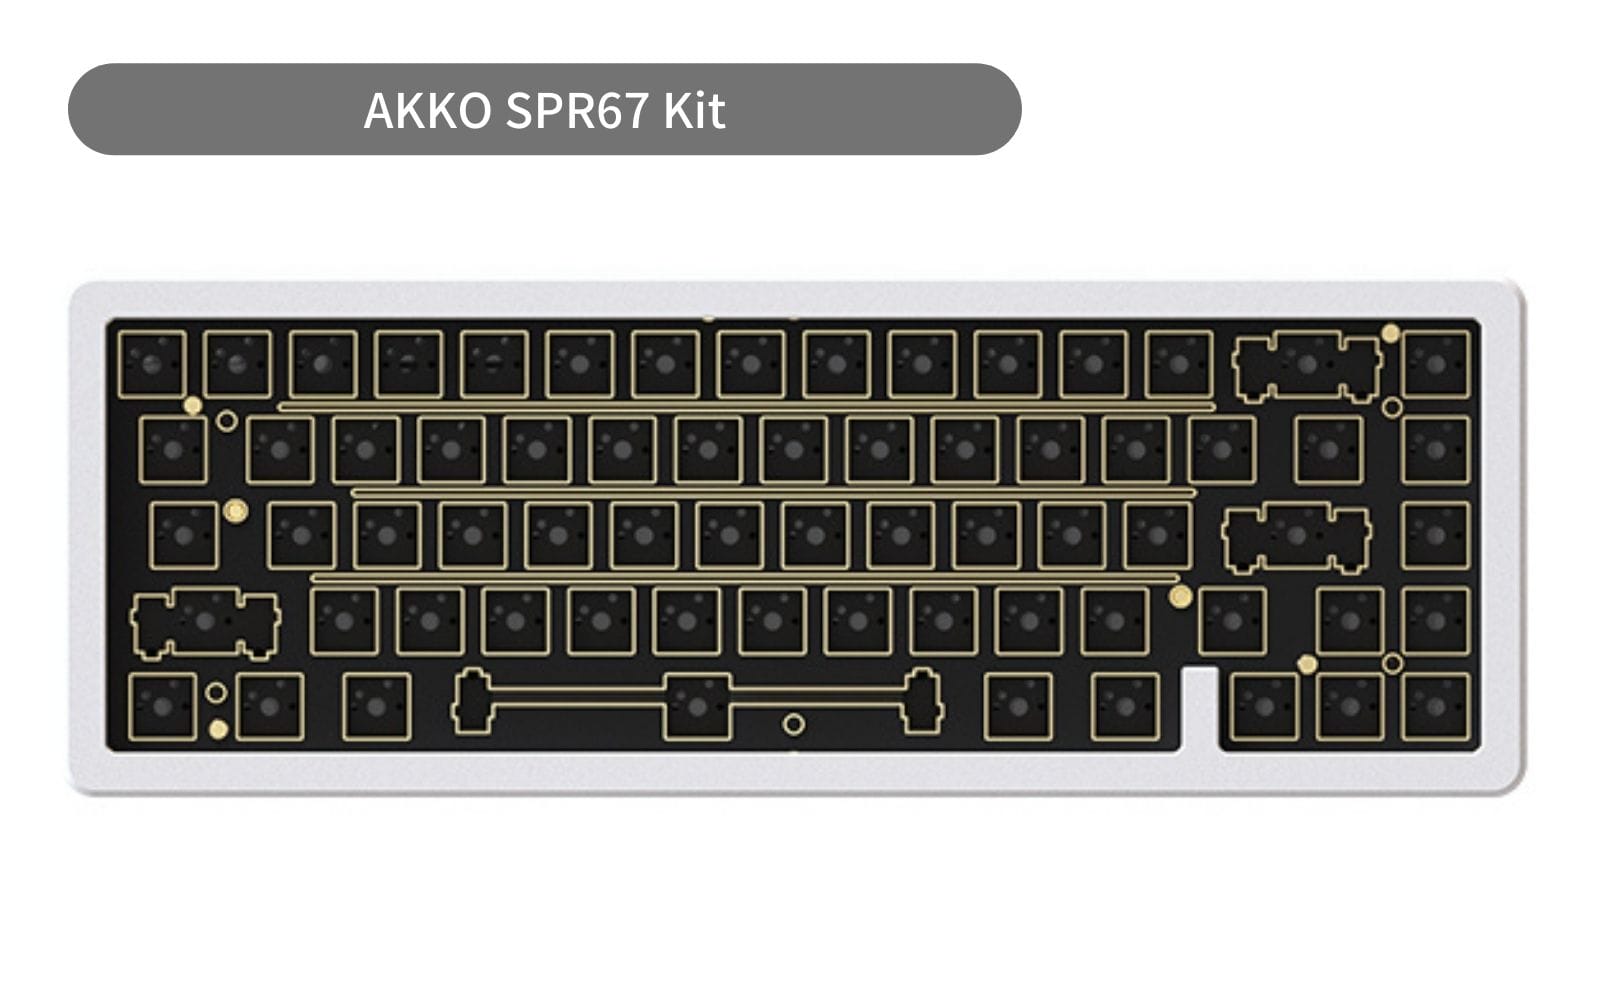 Akko SPR67 Unboxing and Build Guide